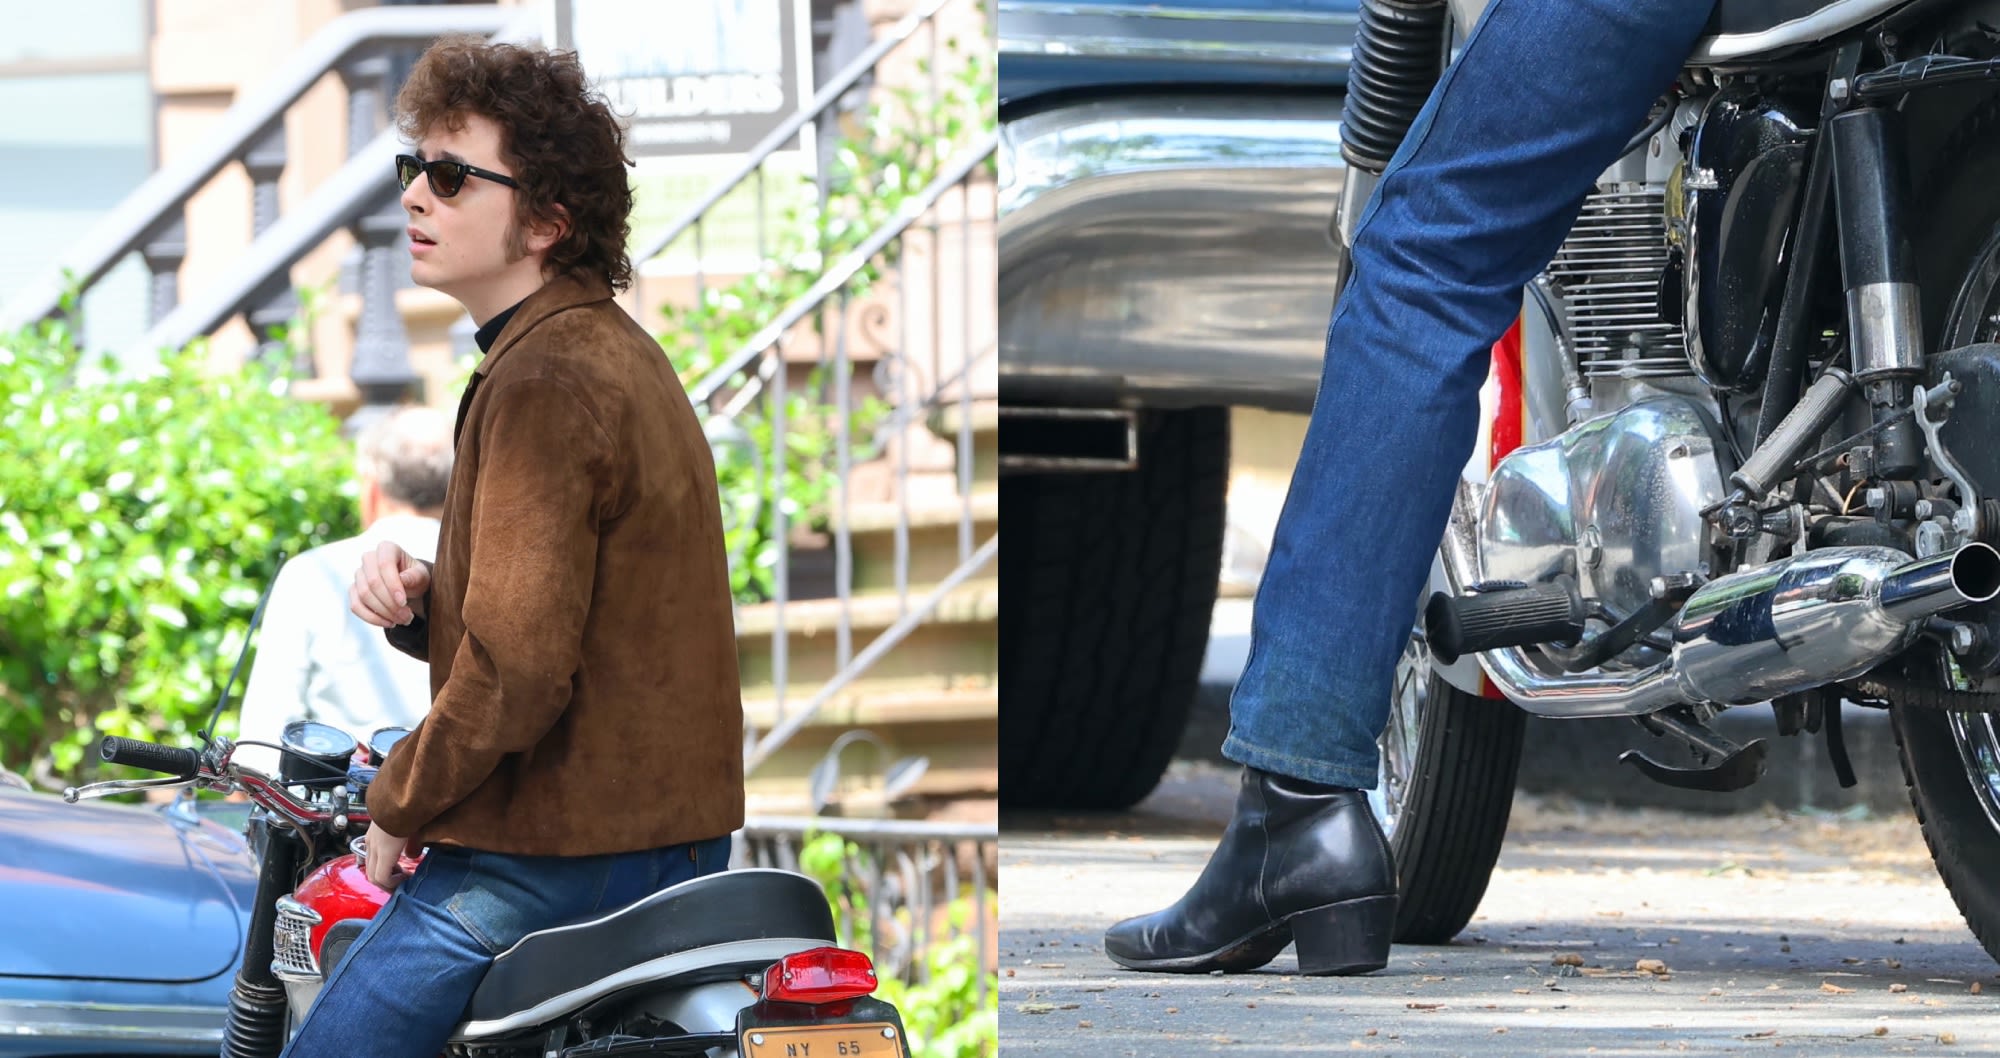 Timothée Chalamet Channels Bob Dylan in Motorcycle Jacket and Chelsea Boots on ‘A Complete Unknown’ Set